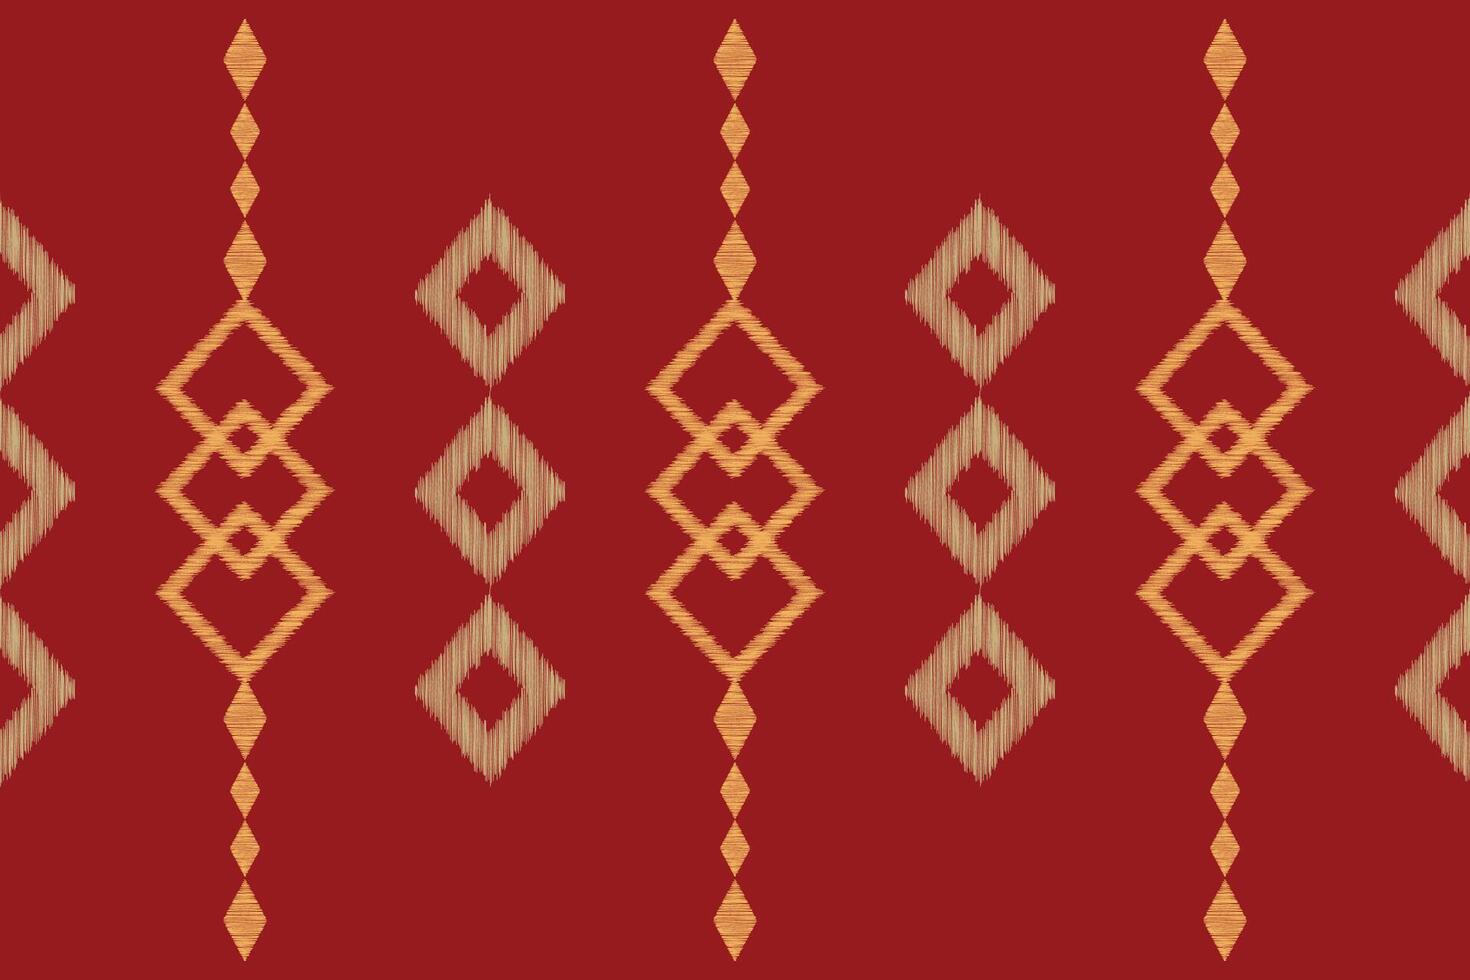 Traditional Ethnic ikat motif fabric pattern geometric style.African Ikat embroidery Ethnic oriental pattern red background wallpaper. Abstract,vector,illustration.Texture,frame,decoration. vector